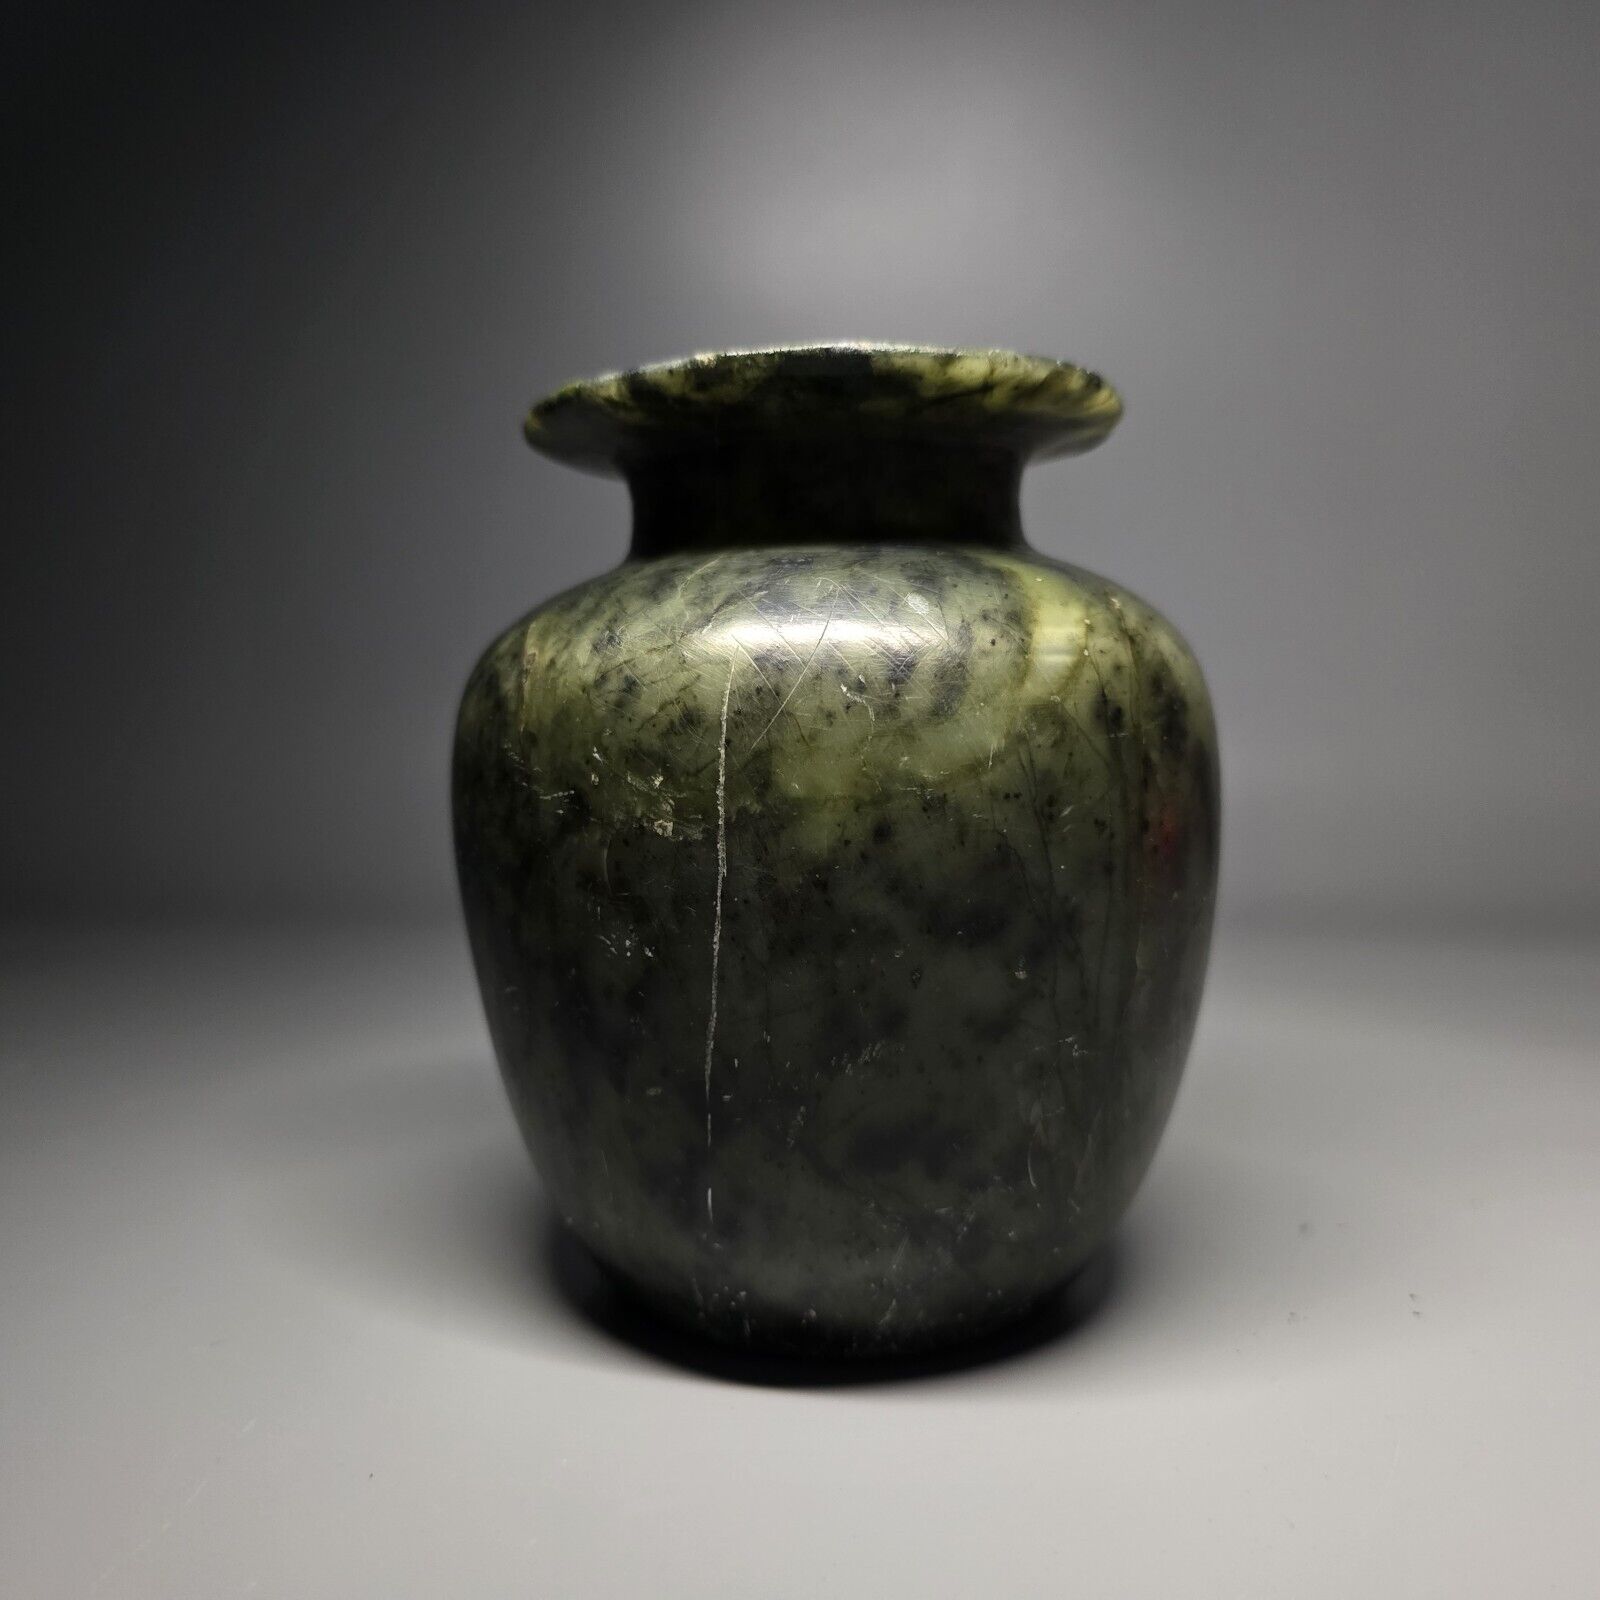 AN IMPORTANT AND UNIQUE PROBABLY EGYPTIAN STONE VASE.